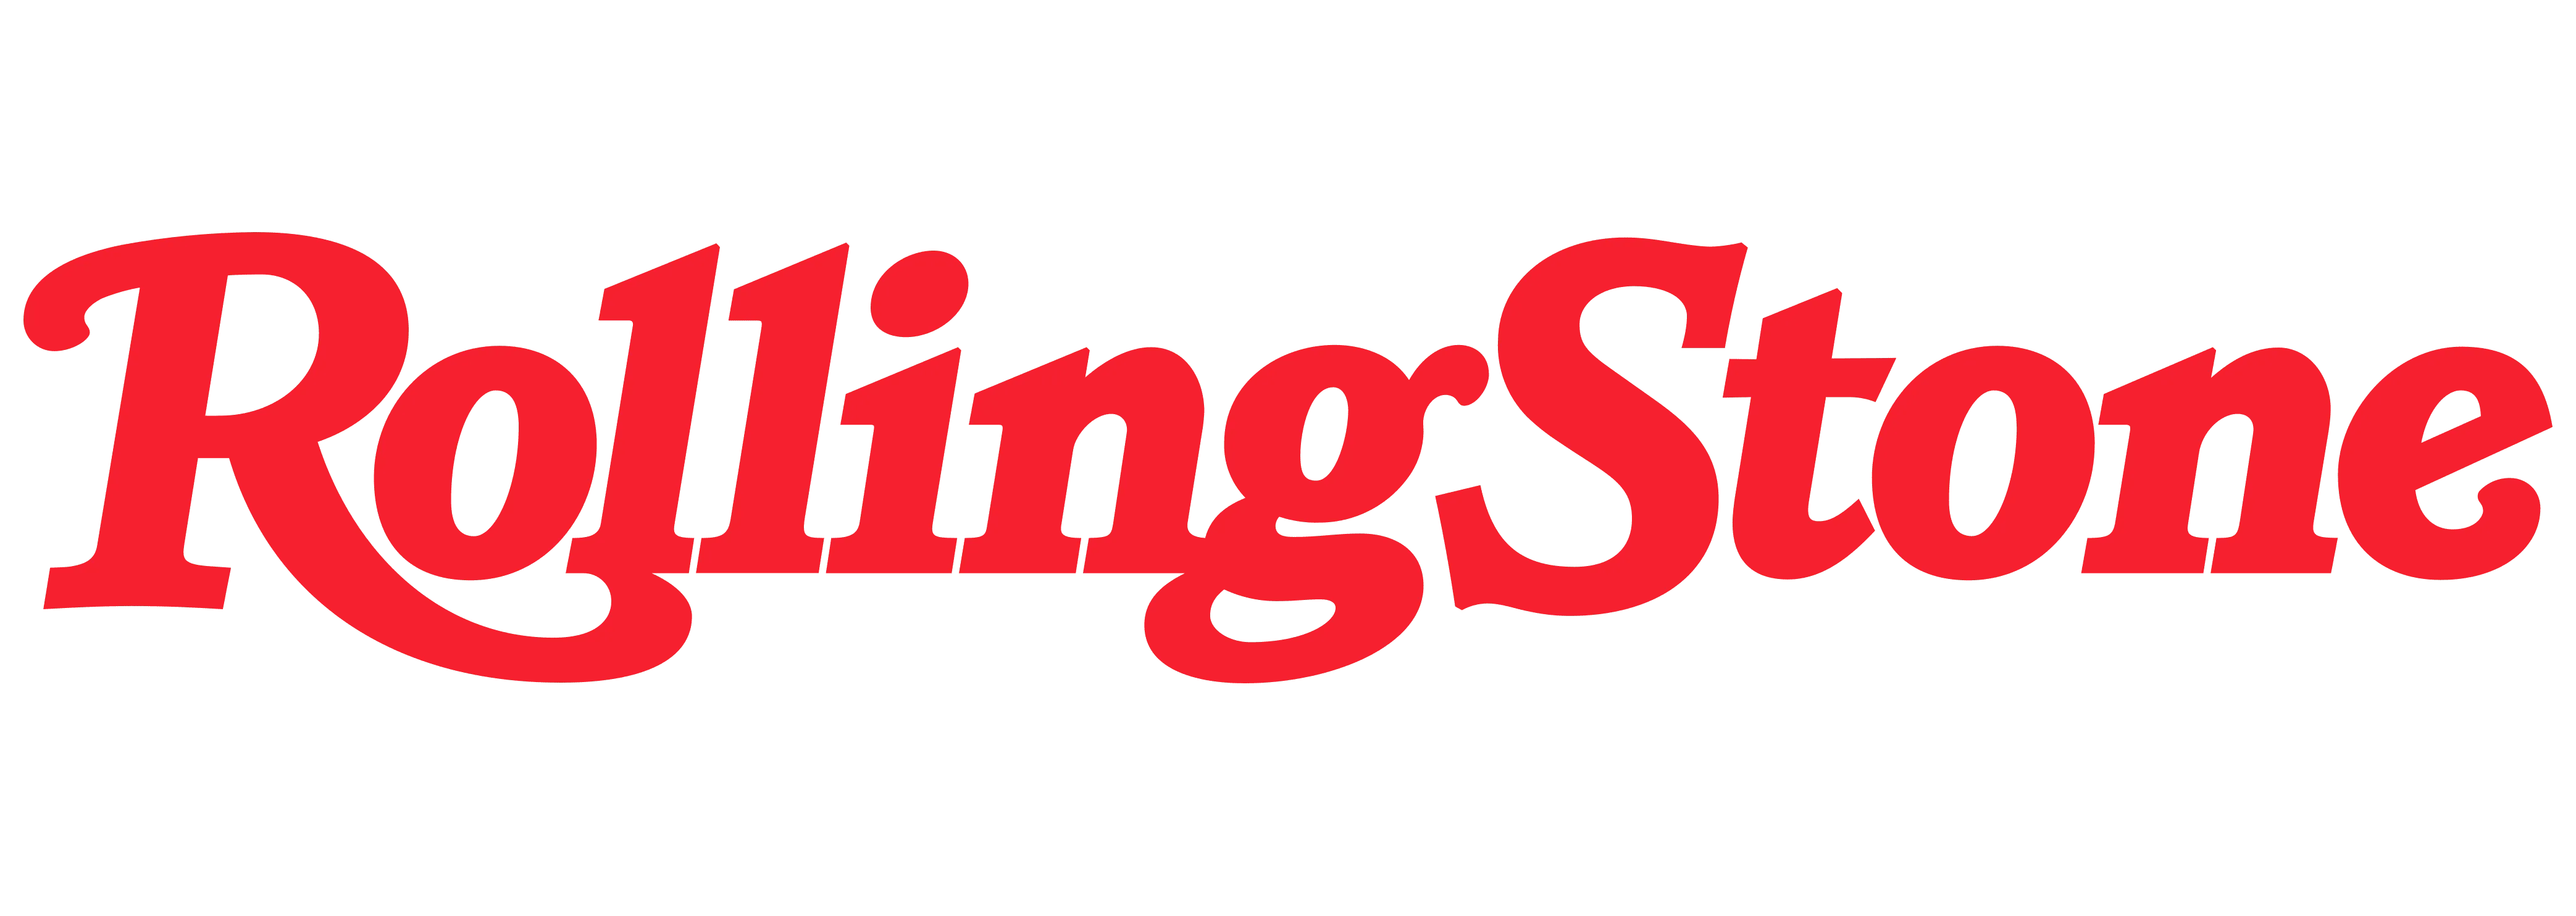 Rolling Stone Magazine Logo for Pro-Ject X1 Record Player Review - Pro-Ject Audio Systems USA Home